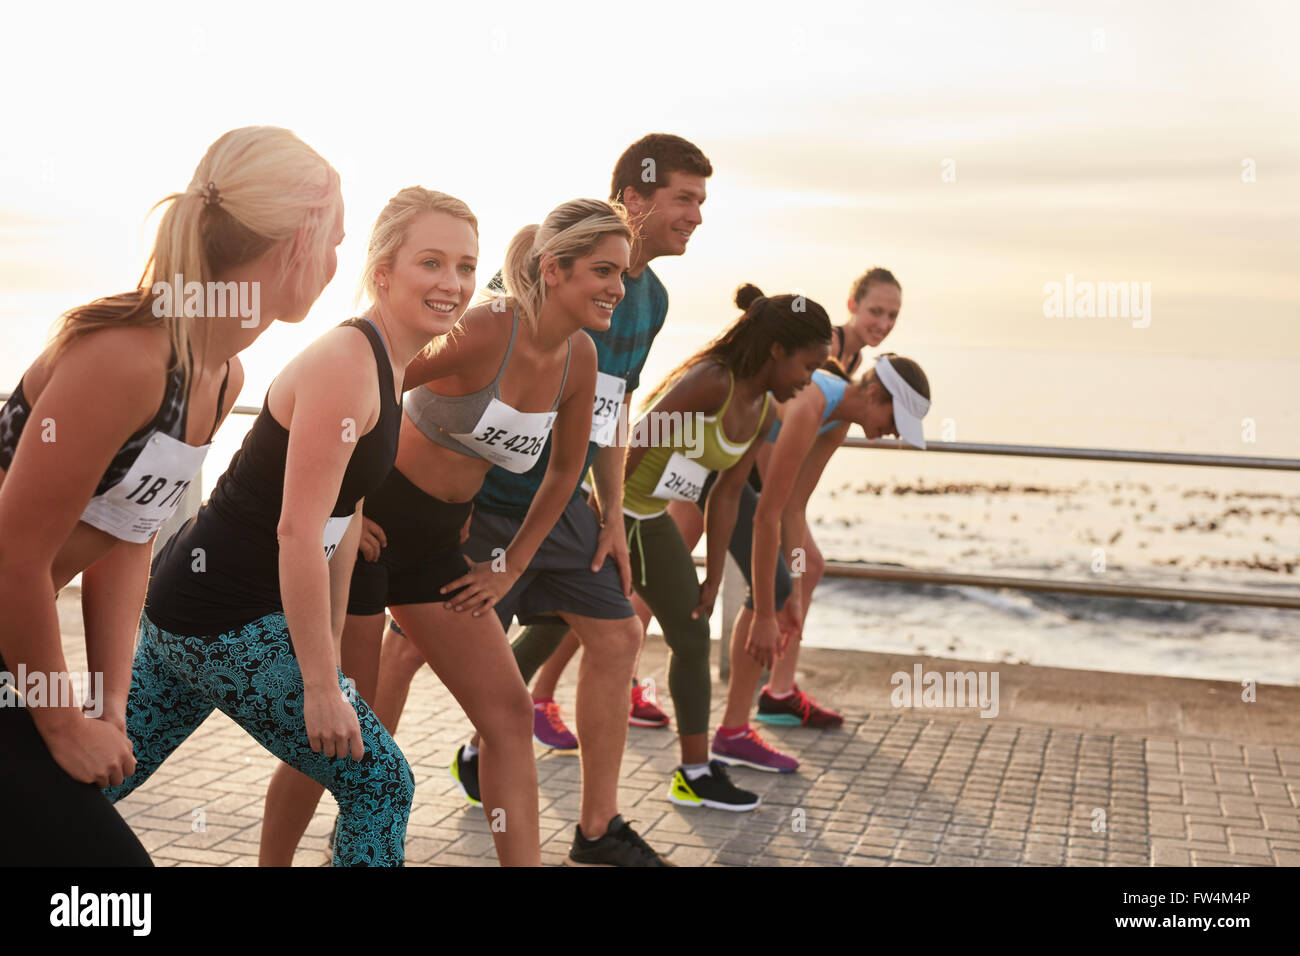 The start of a marathon, athletes standing at the starting line. Running competition on seaside promenade. Stock Photo